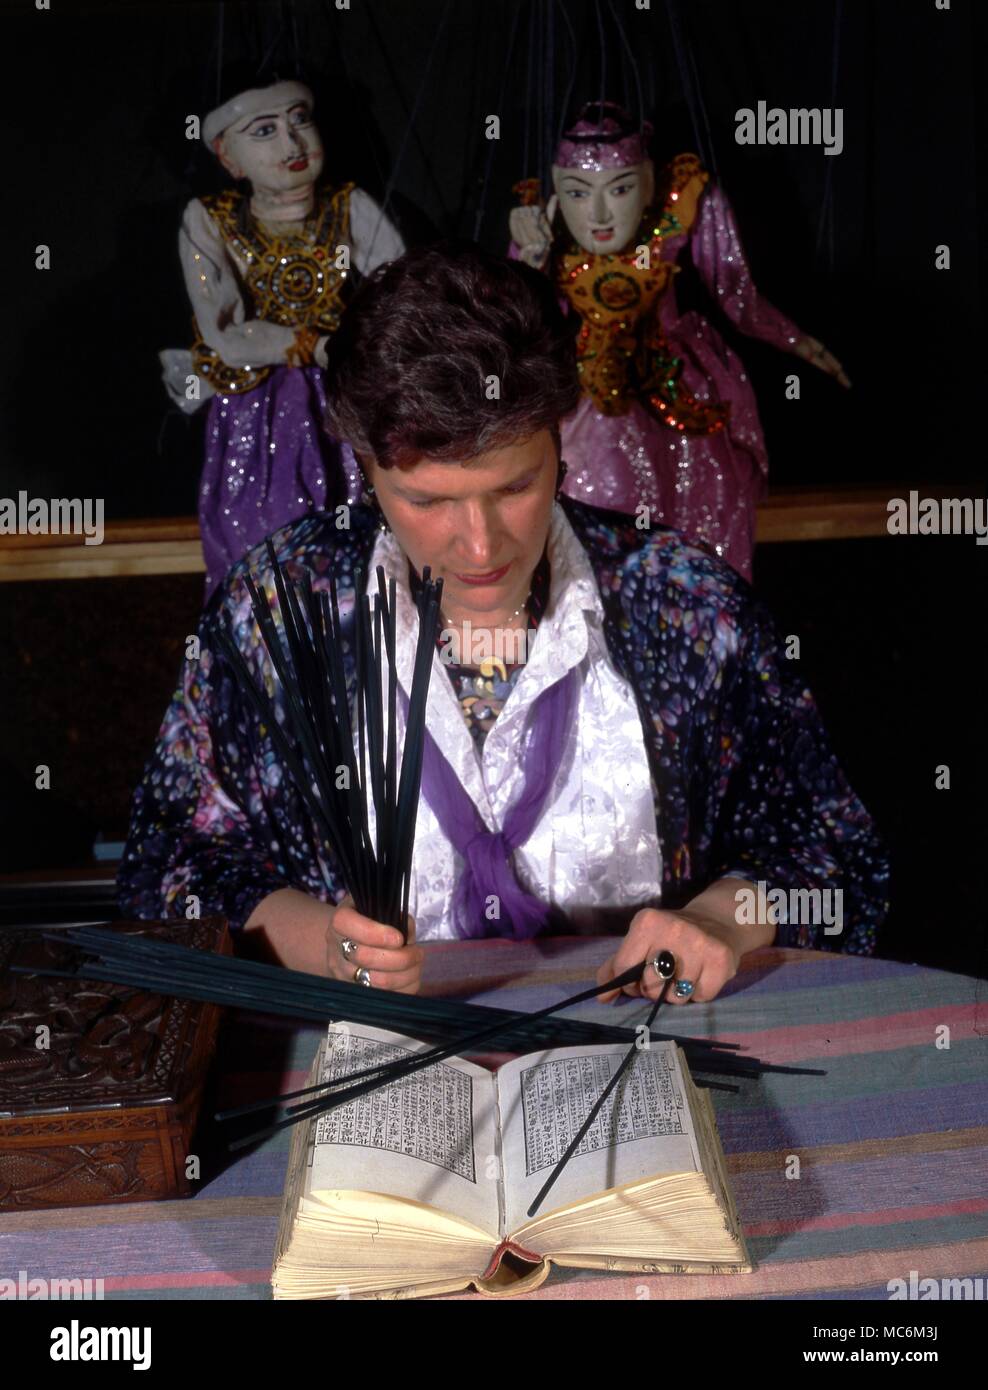 I Ching The clairvoyant Dale Brown using sticks to determine a hexagram prior to consulting the Chinese Book of Changes. Stock Photo